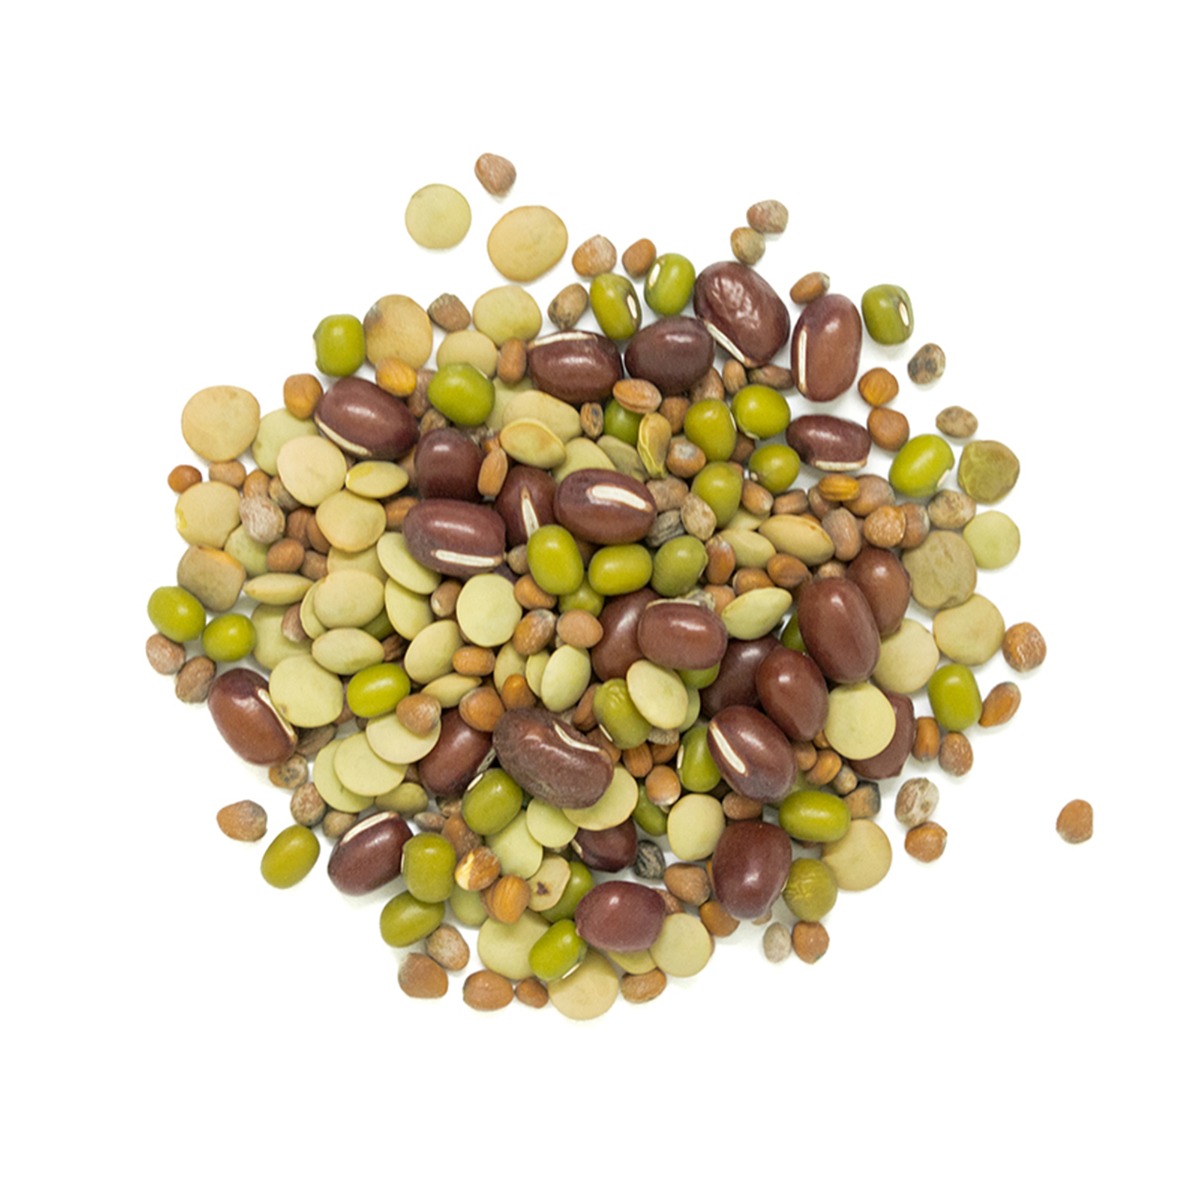 Real • Organic Bean Salad Sprouting Seed Mix-955